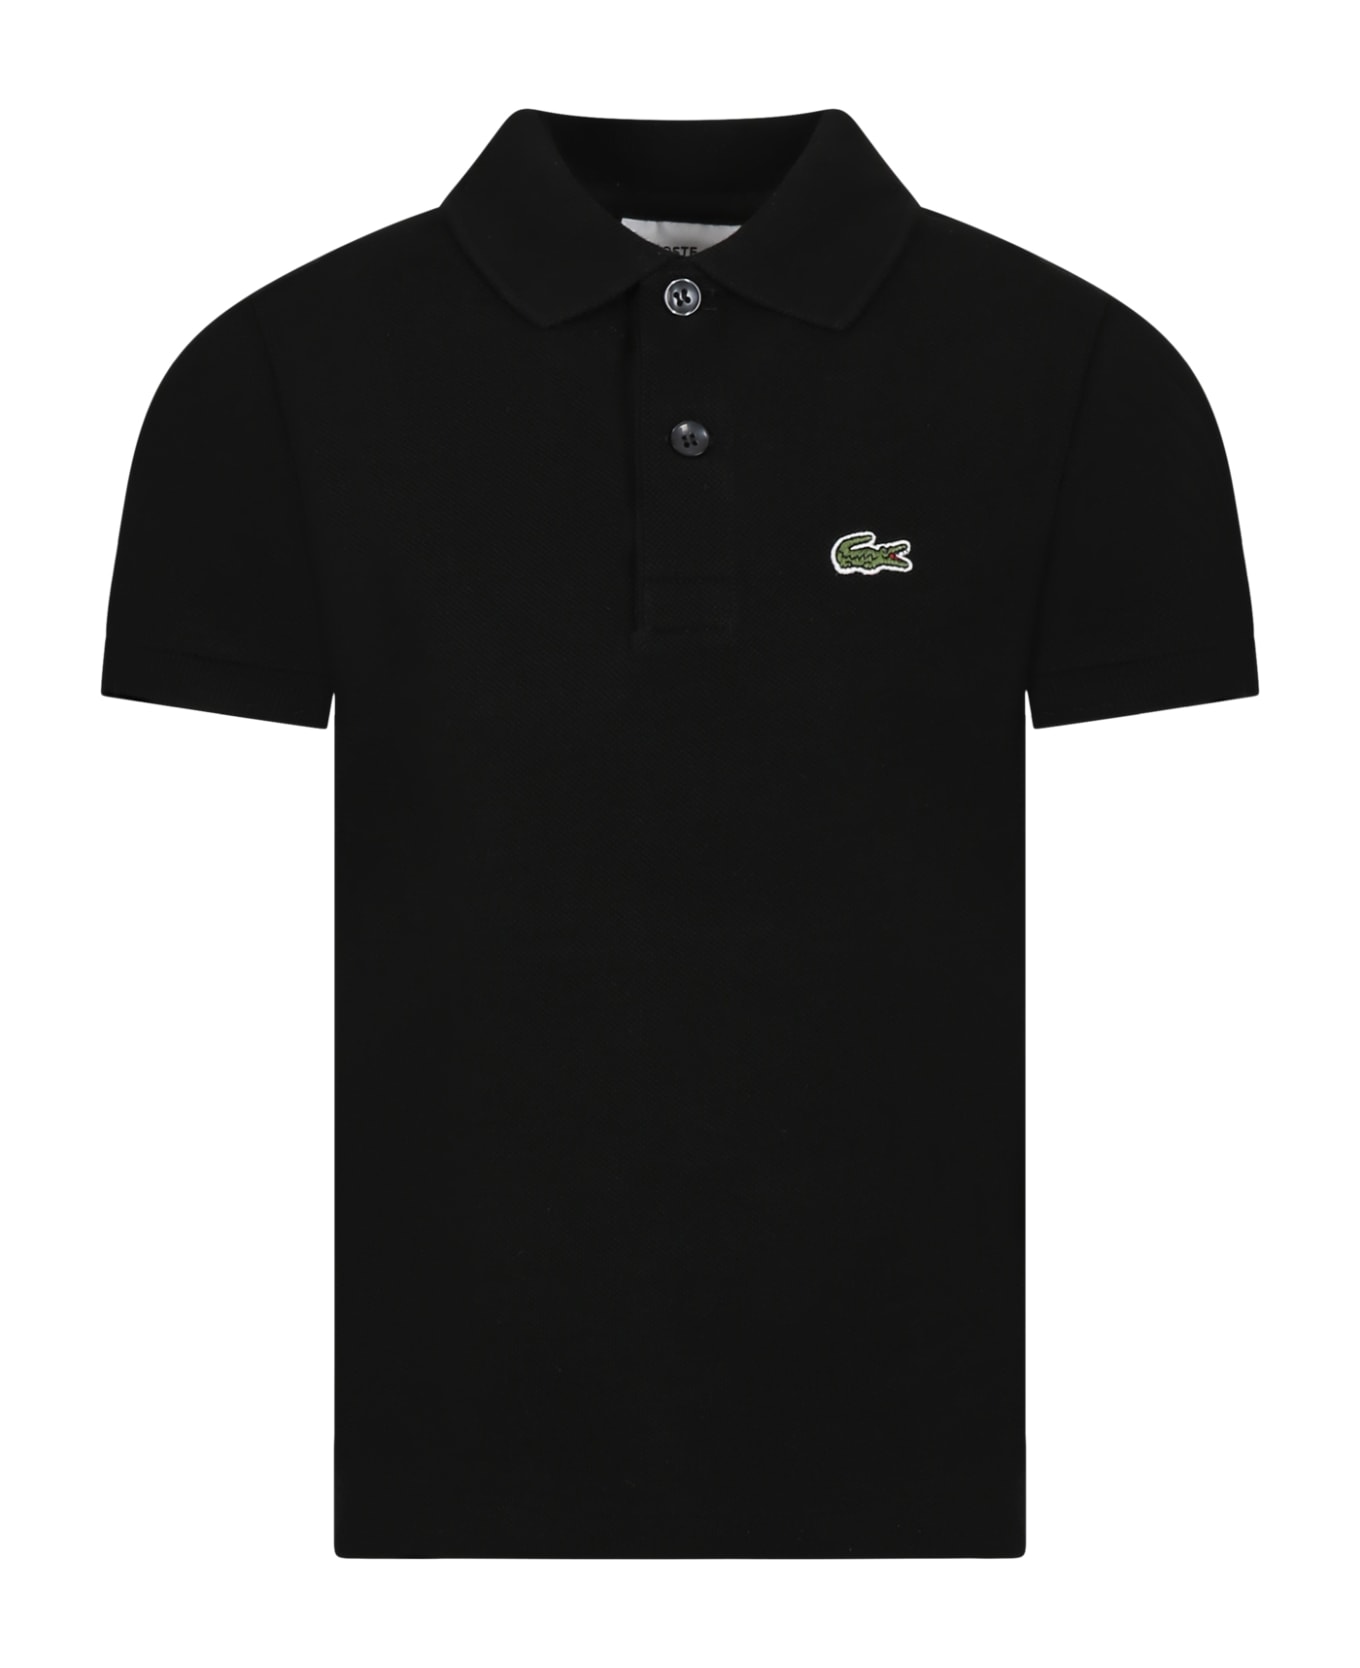 Lacoste Black Polo Shirt For Boy With Green Crocodile - Black Tシャツ＆ポロシャツ